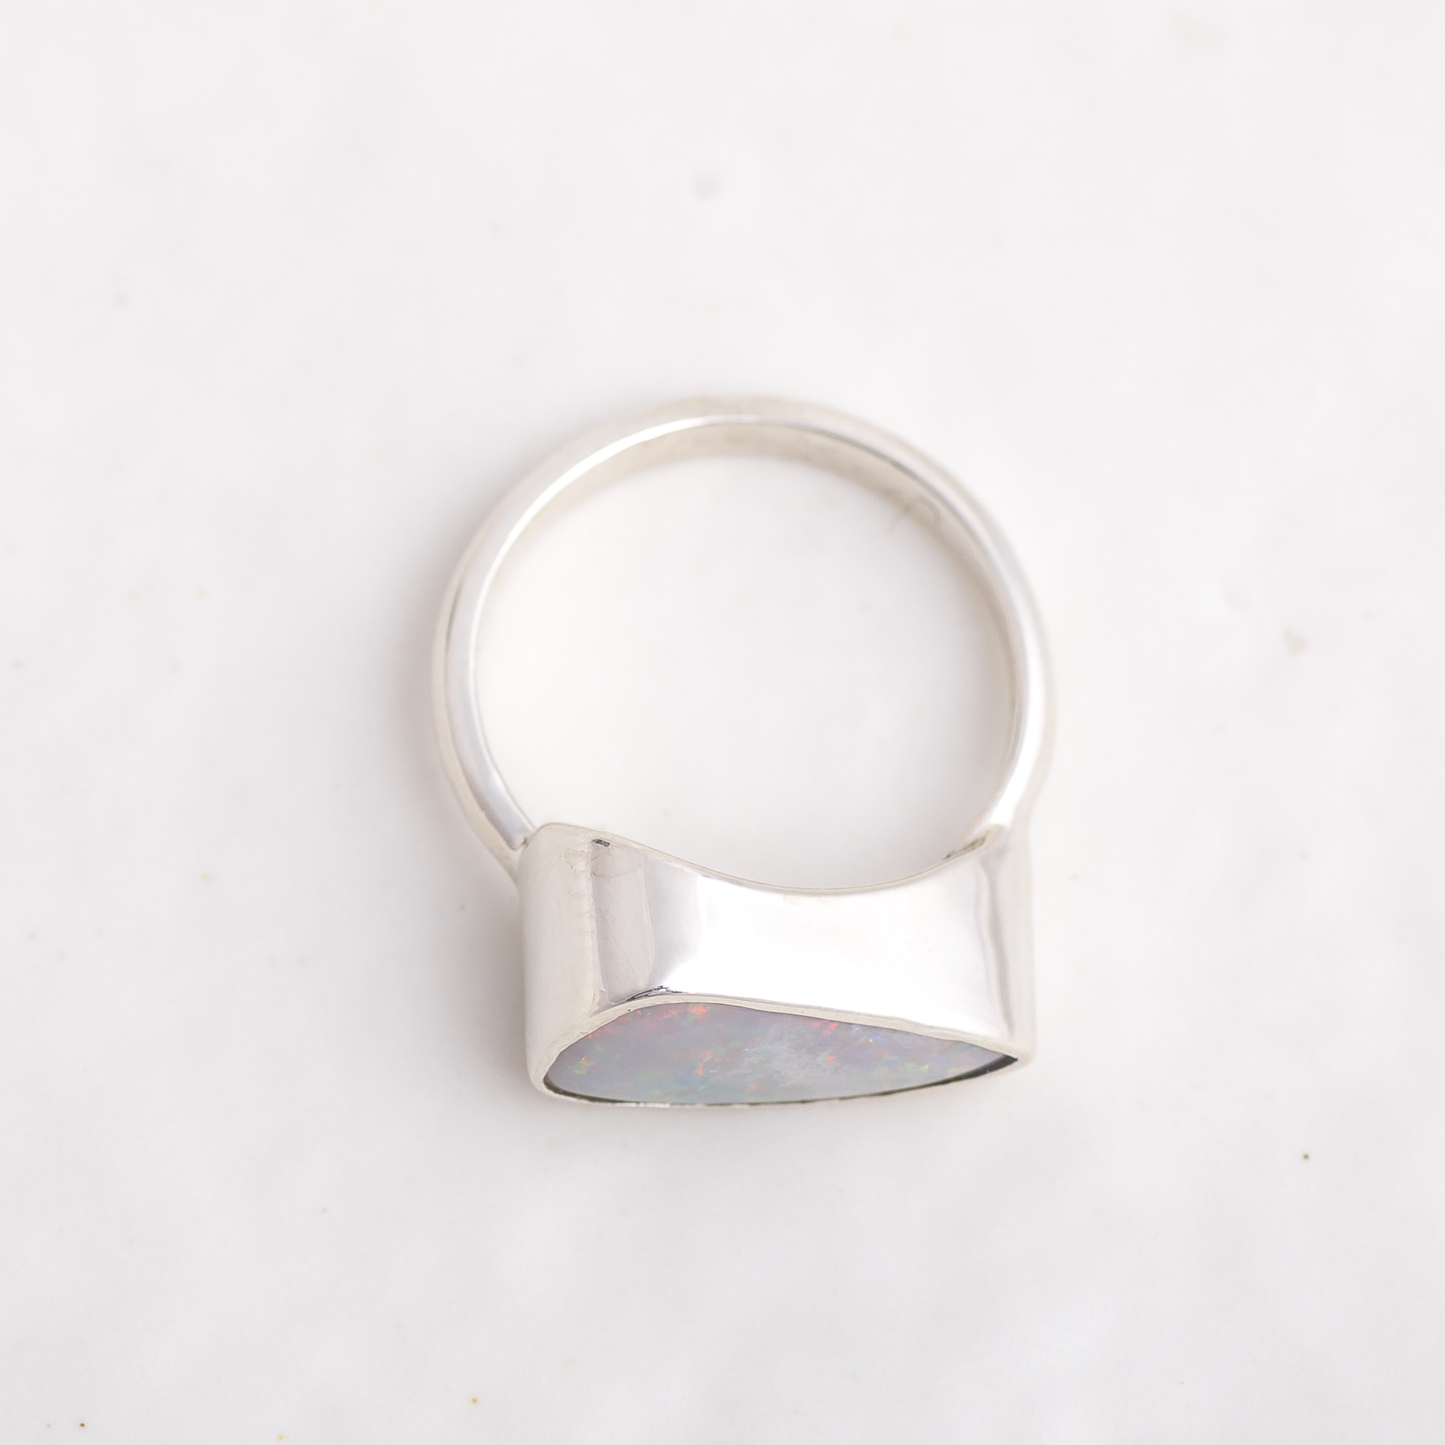 Opal East West Ring #7 ◇ Australian Opal ◇ Made in your size.